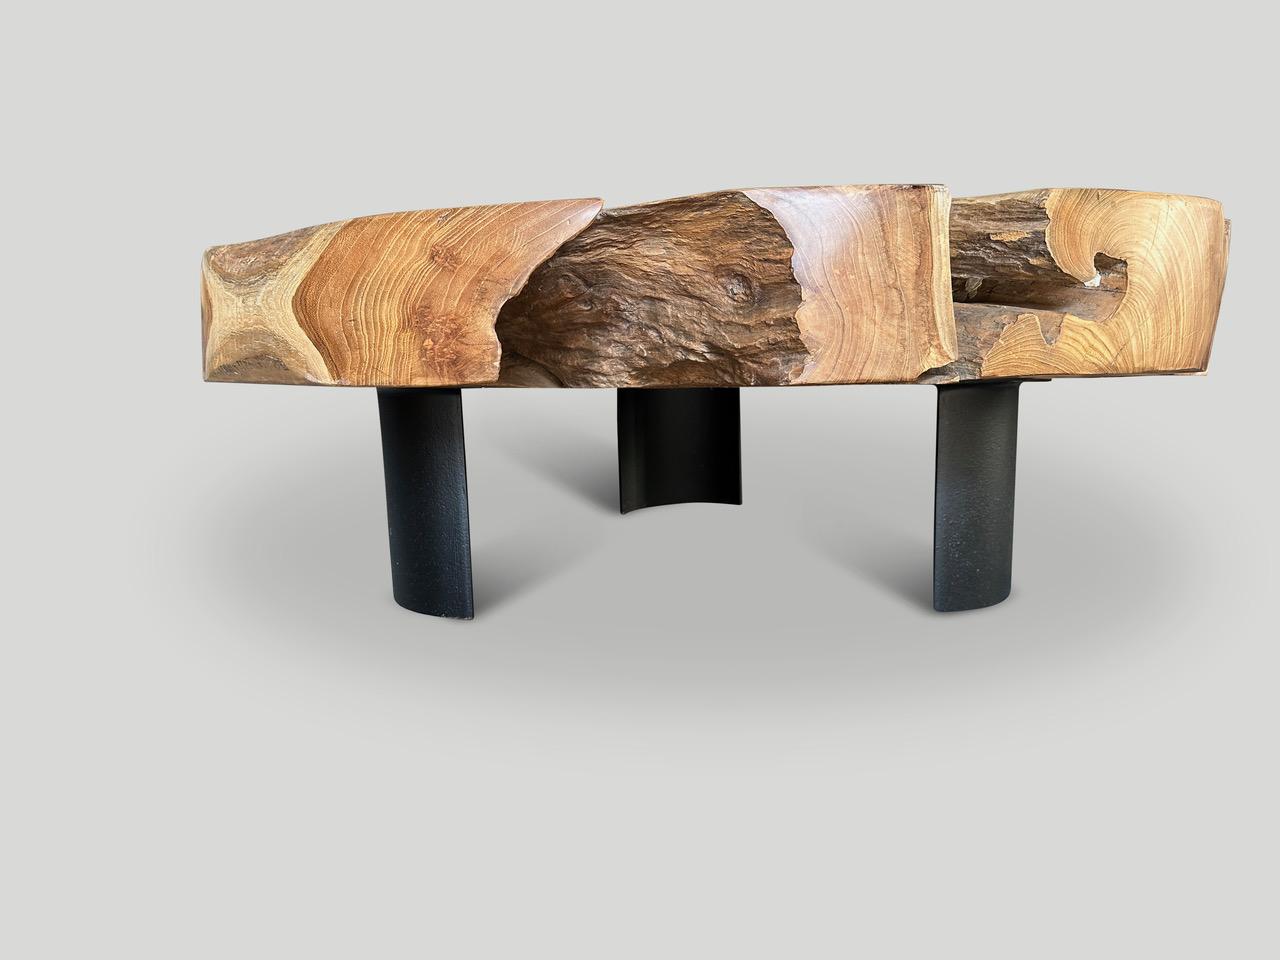 Reclaimed teak root coffee table. Hand carved into this beautiful usable shape whilst respecting the natural organic wood. This impressive five inch thick top floats on three minimalist steel legs. We polished the aged teak with a natural oil